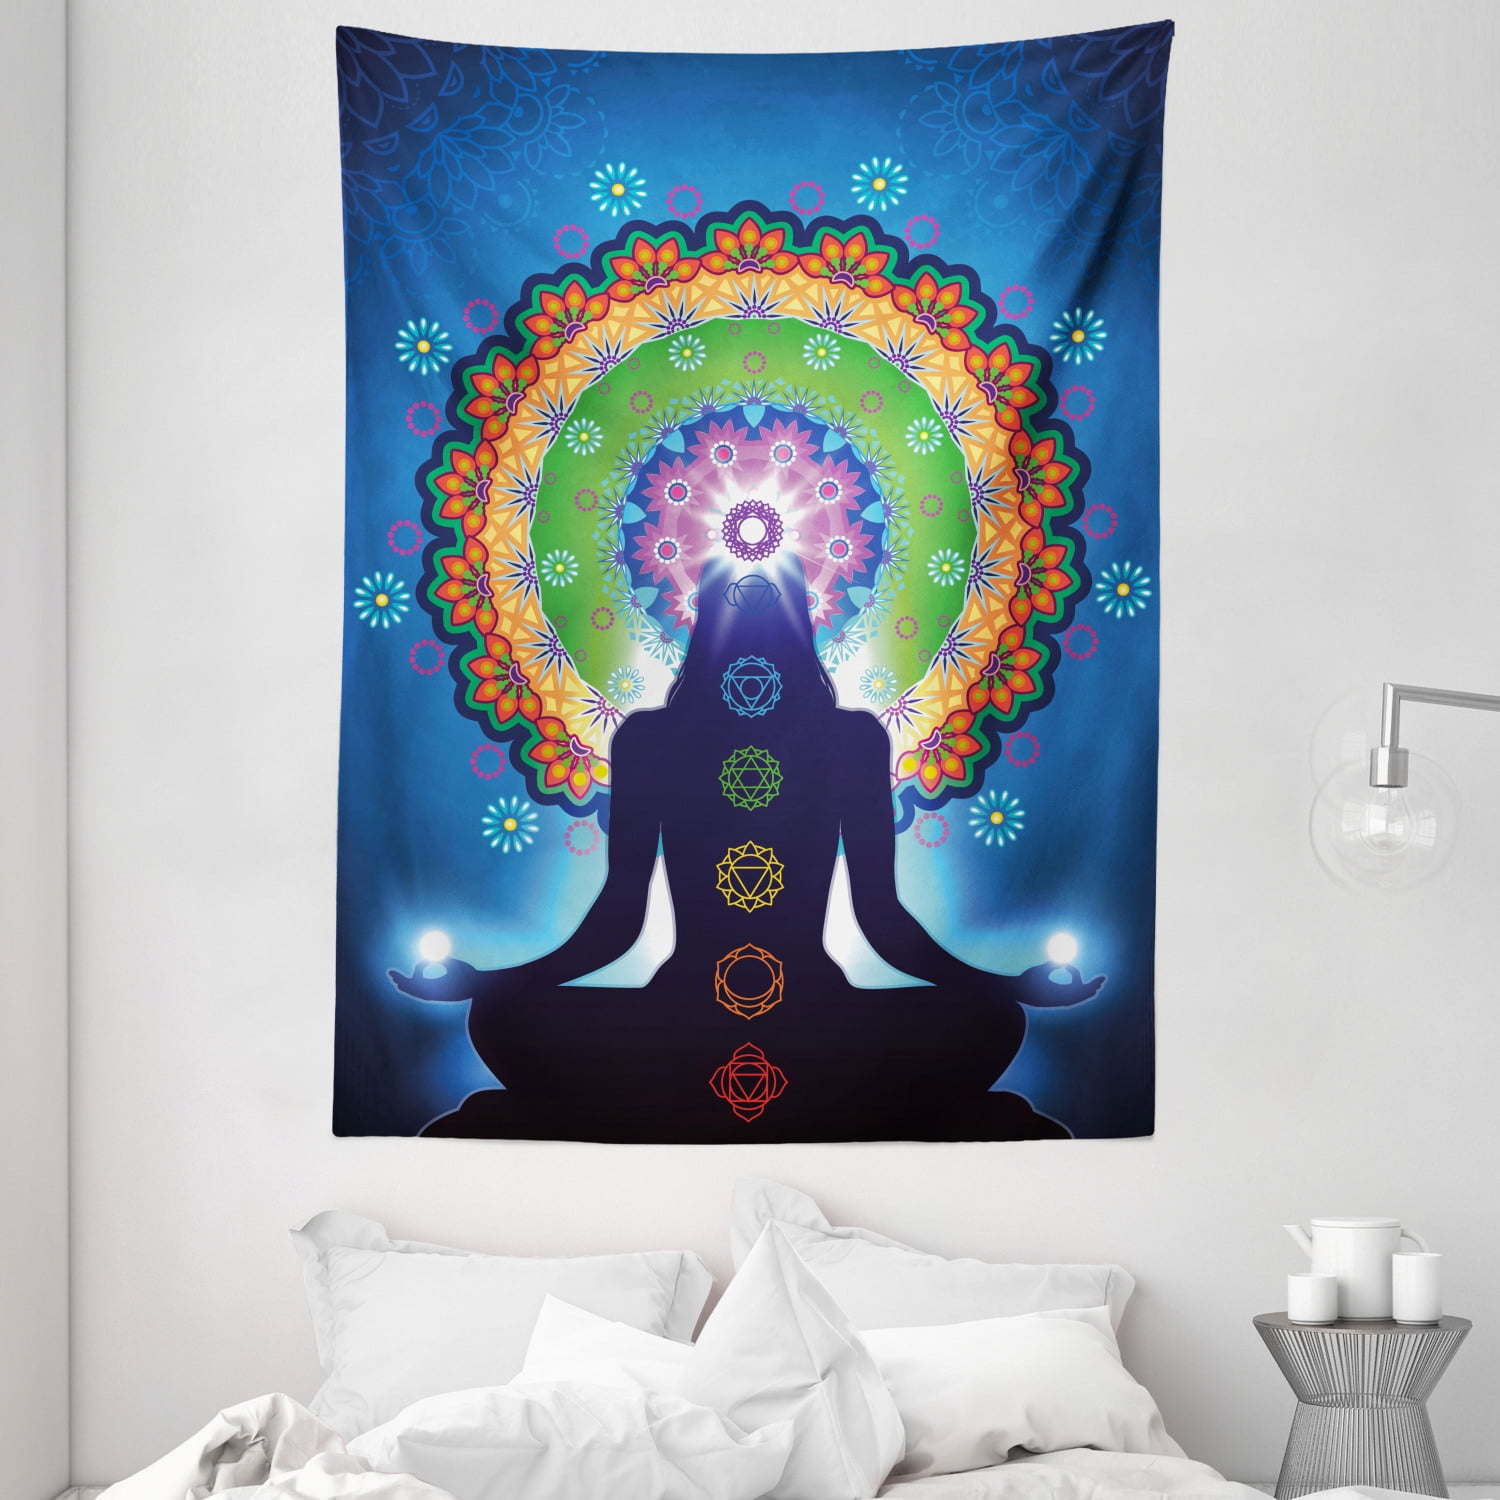 Seven Chakra Cotton Yoga Mat Tapestry Ethnic Indian Wall Hanging Table Cover Art 